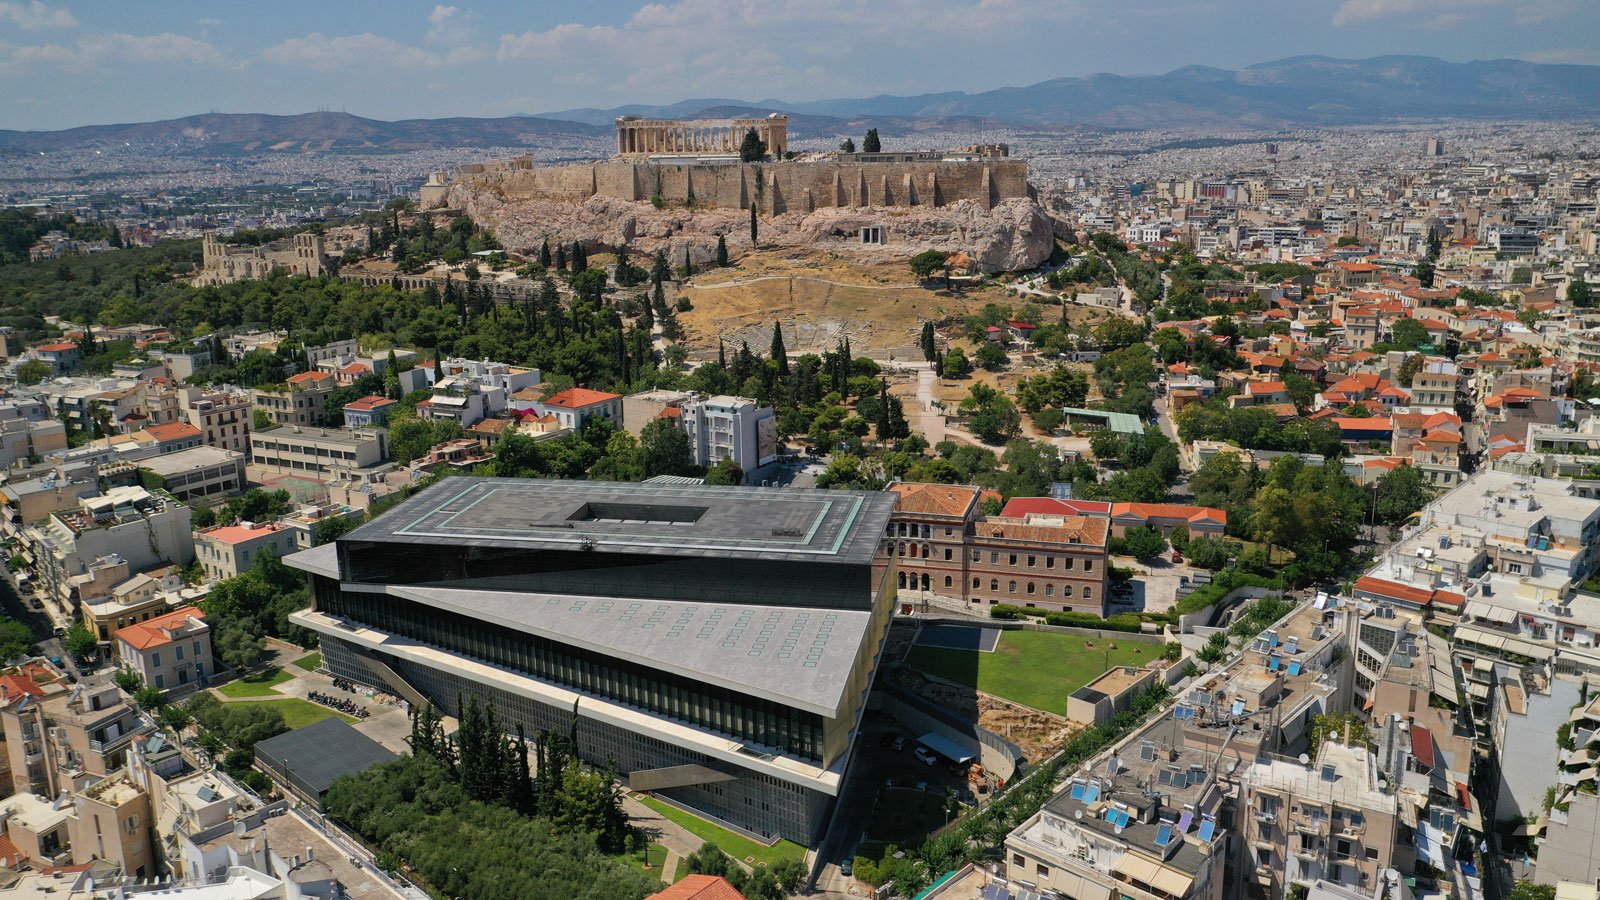 The monumental New Acropolis Museum